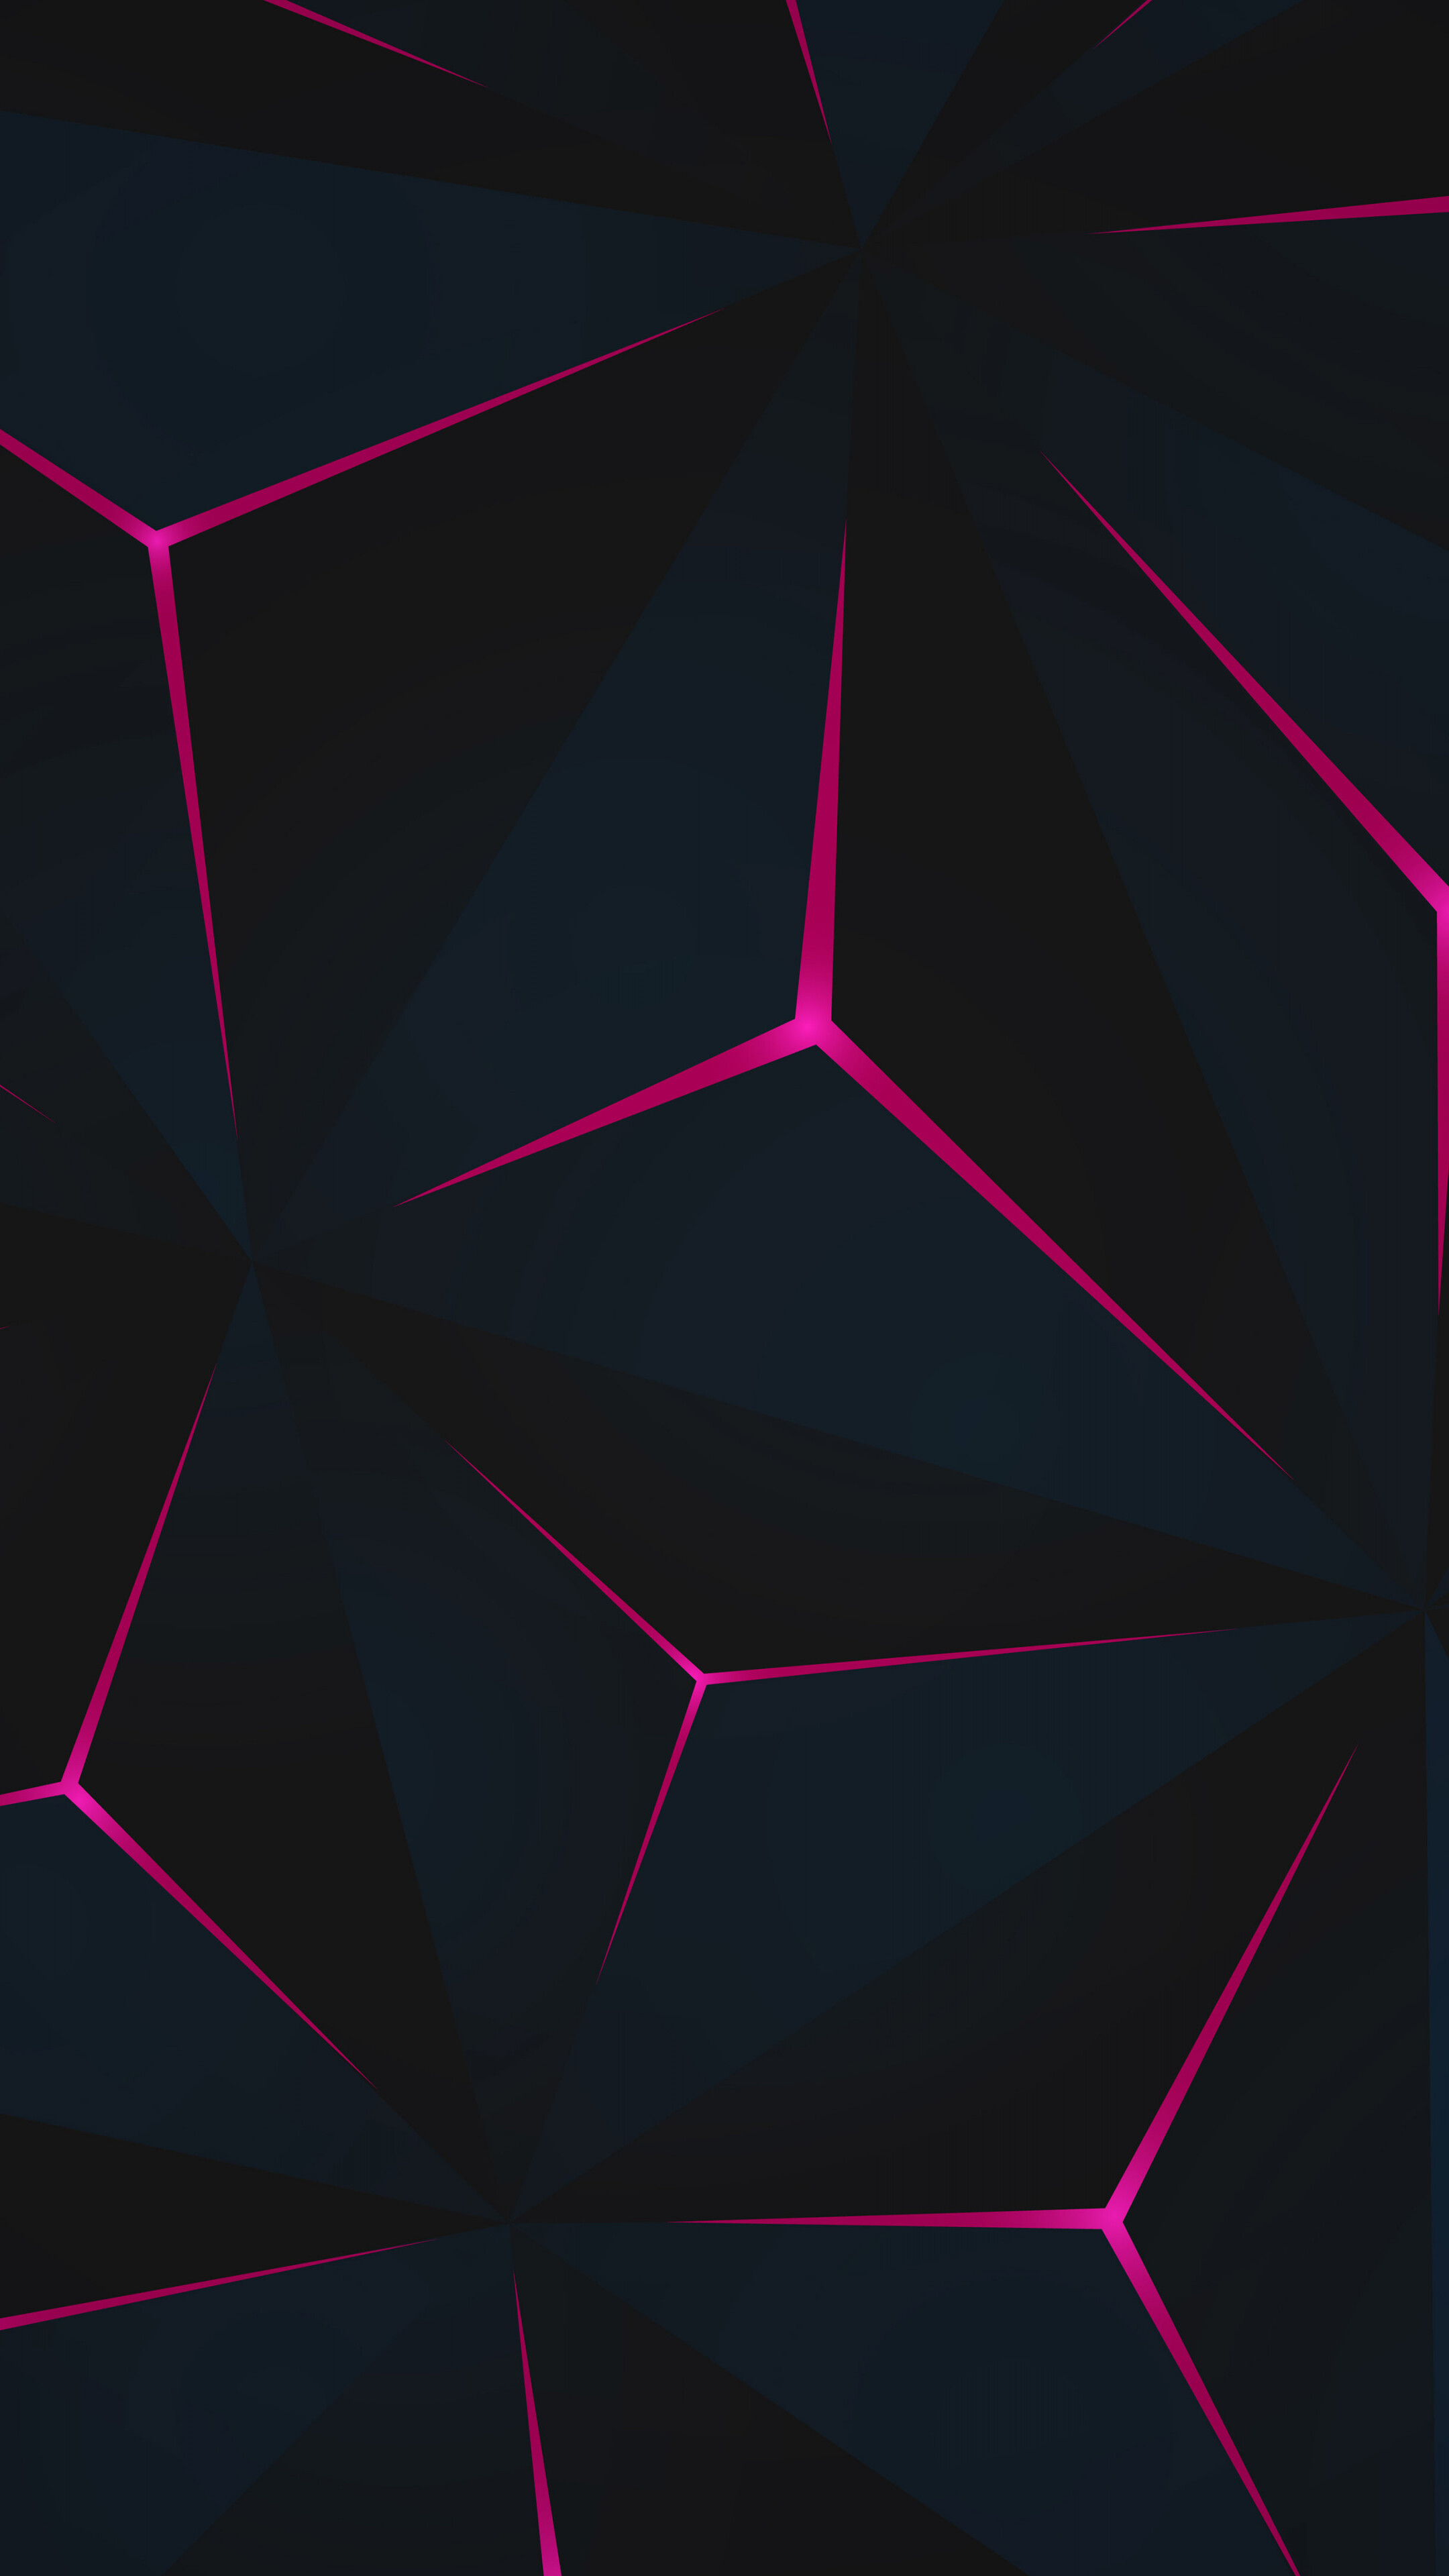 Glow in the Dark: Abstract pattern, Triangle, Glowing edges. 2160x3840 4K Wallpaper.